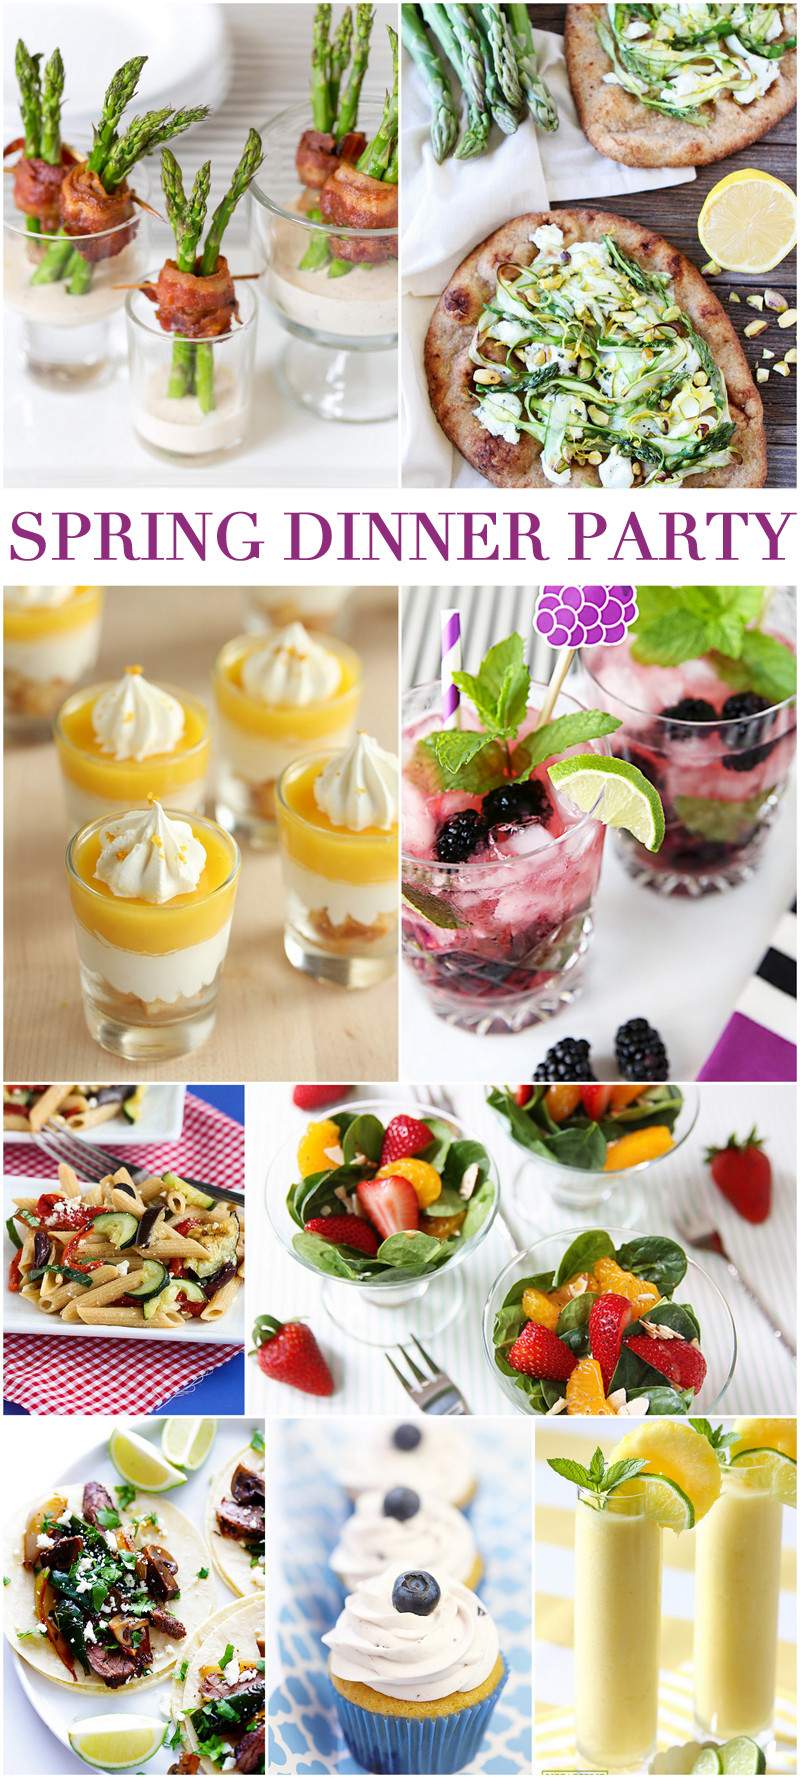 Spring Dinner Ideas
 Host a Spring Dinner Party in Style